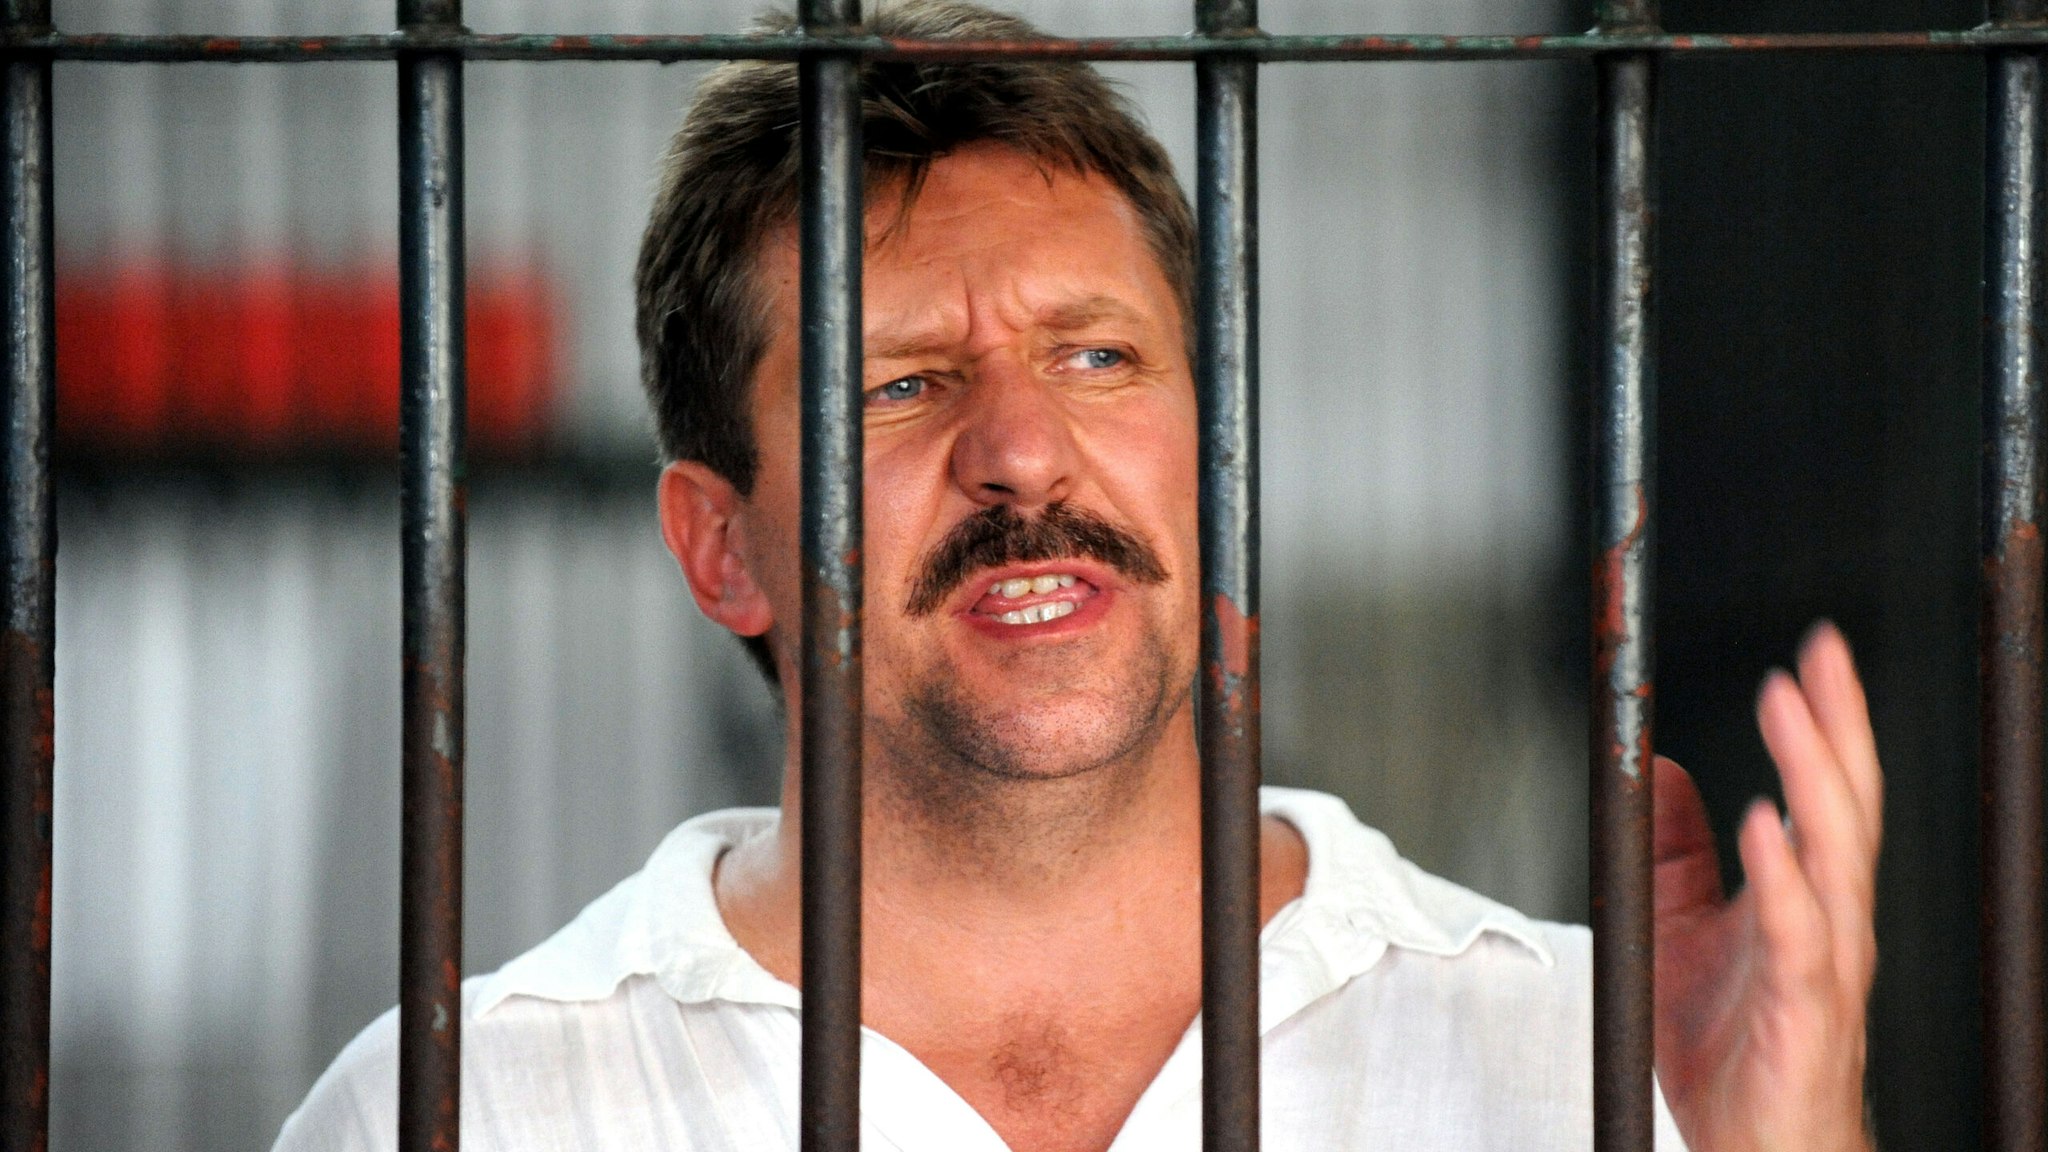 Russian arms dealer Viktor Bout speaks to the press from behind his cell bars of the criminal court detention center in Bangkok on April 9, 2008. Thailand will not prosecute Russian arms dealer Viktor Bout in local courts, clearing the way for the extradition of the "Merchant of Death" to the United States, police and lawyers said. Bout, who is accused of funnelling weapons to some of the world's deadliest conflicts, was arrested on March 6 in Bangkok in a sting operation with US anti-drug agents on a warrant on charges of procuring assets for terrorists.